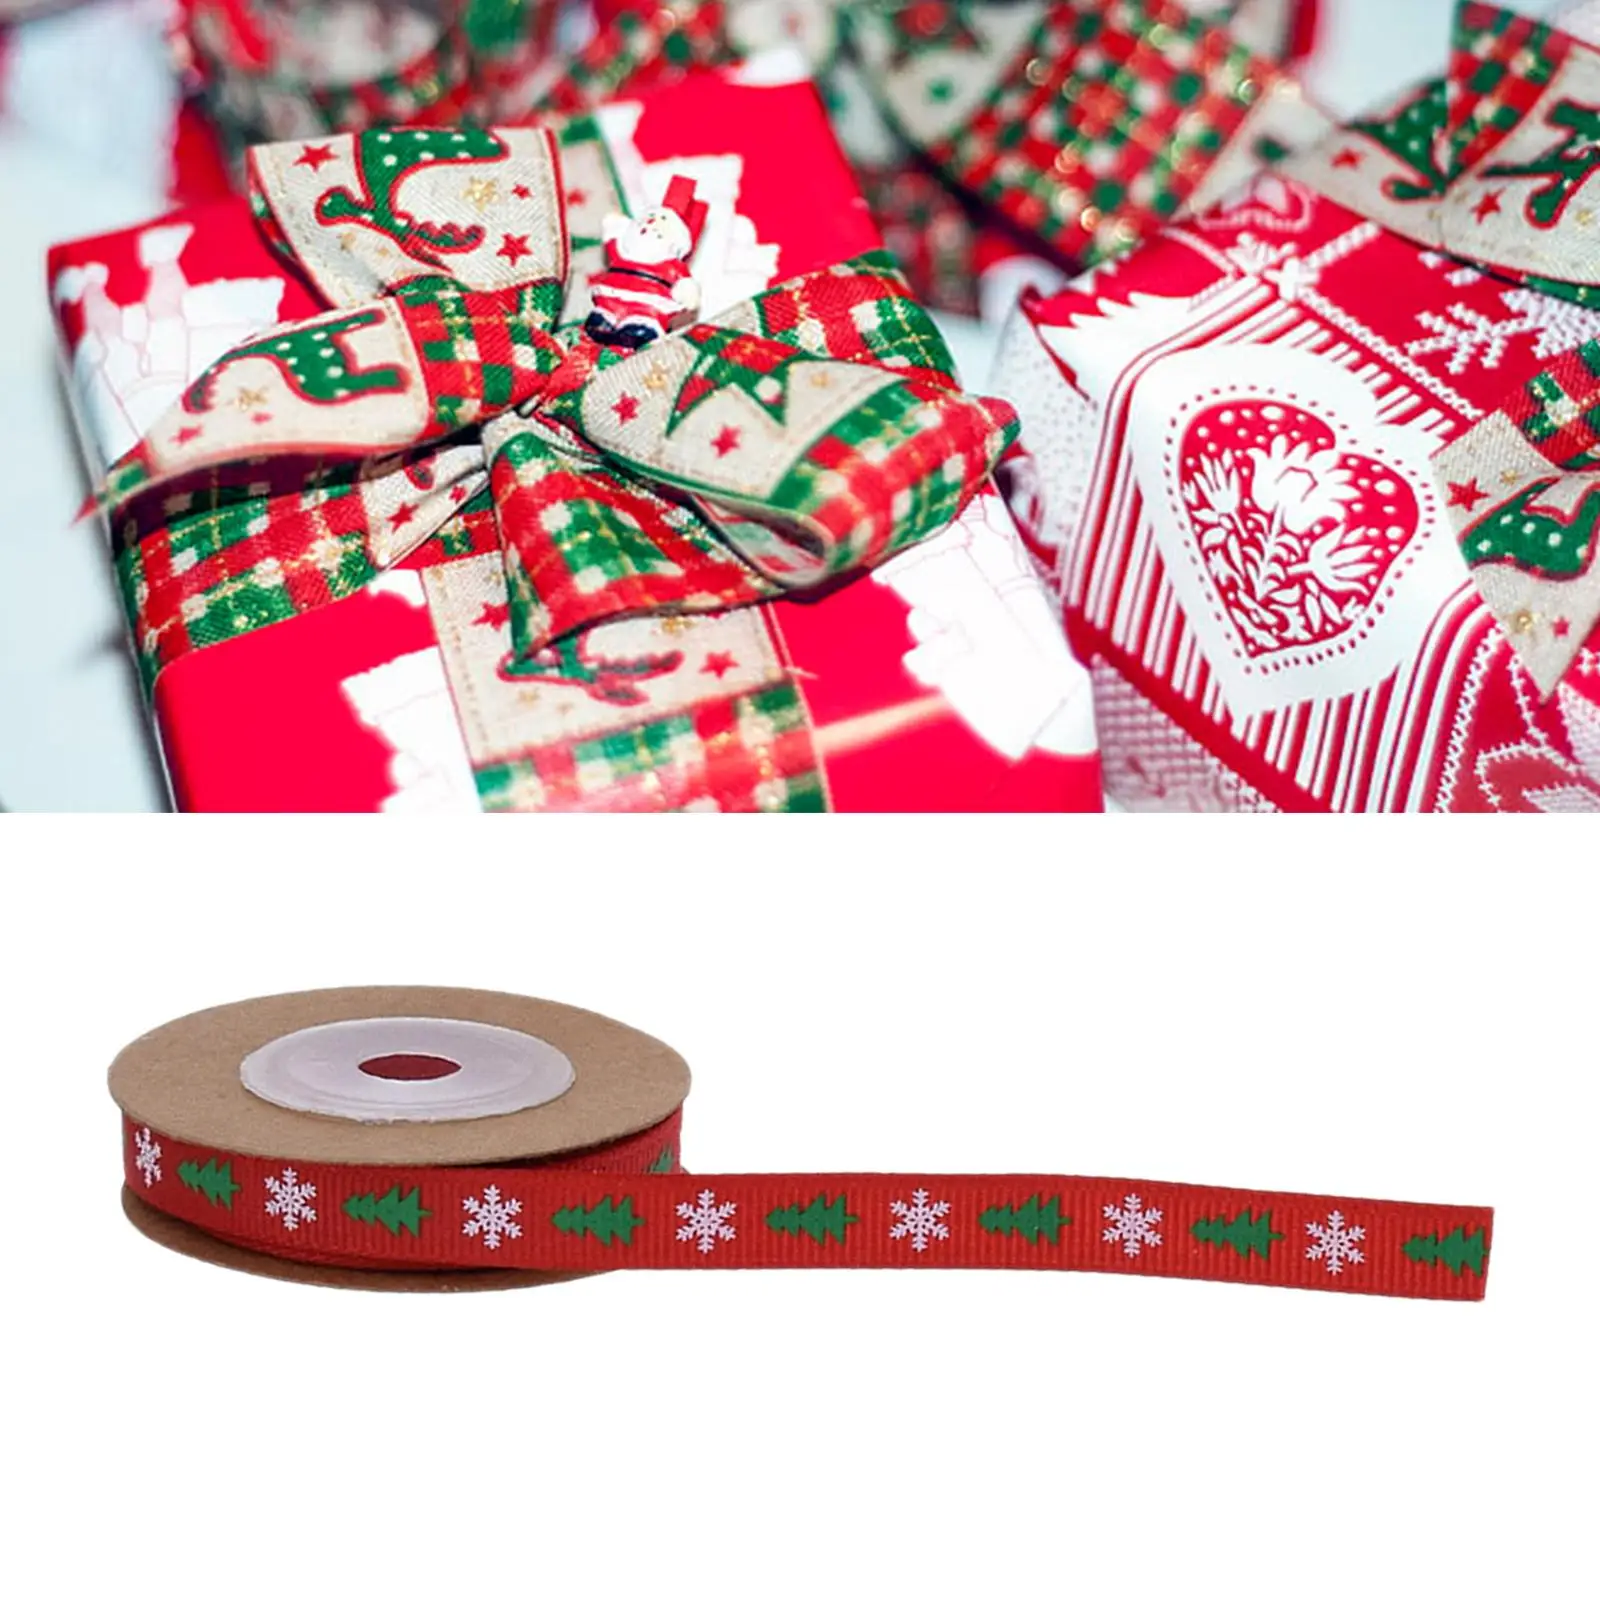 Polyester Holiday Christmas Ribbon Printed for Craft Sewing Xmas Decor Party Gift Wrapping